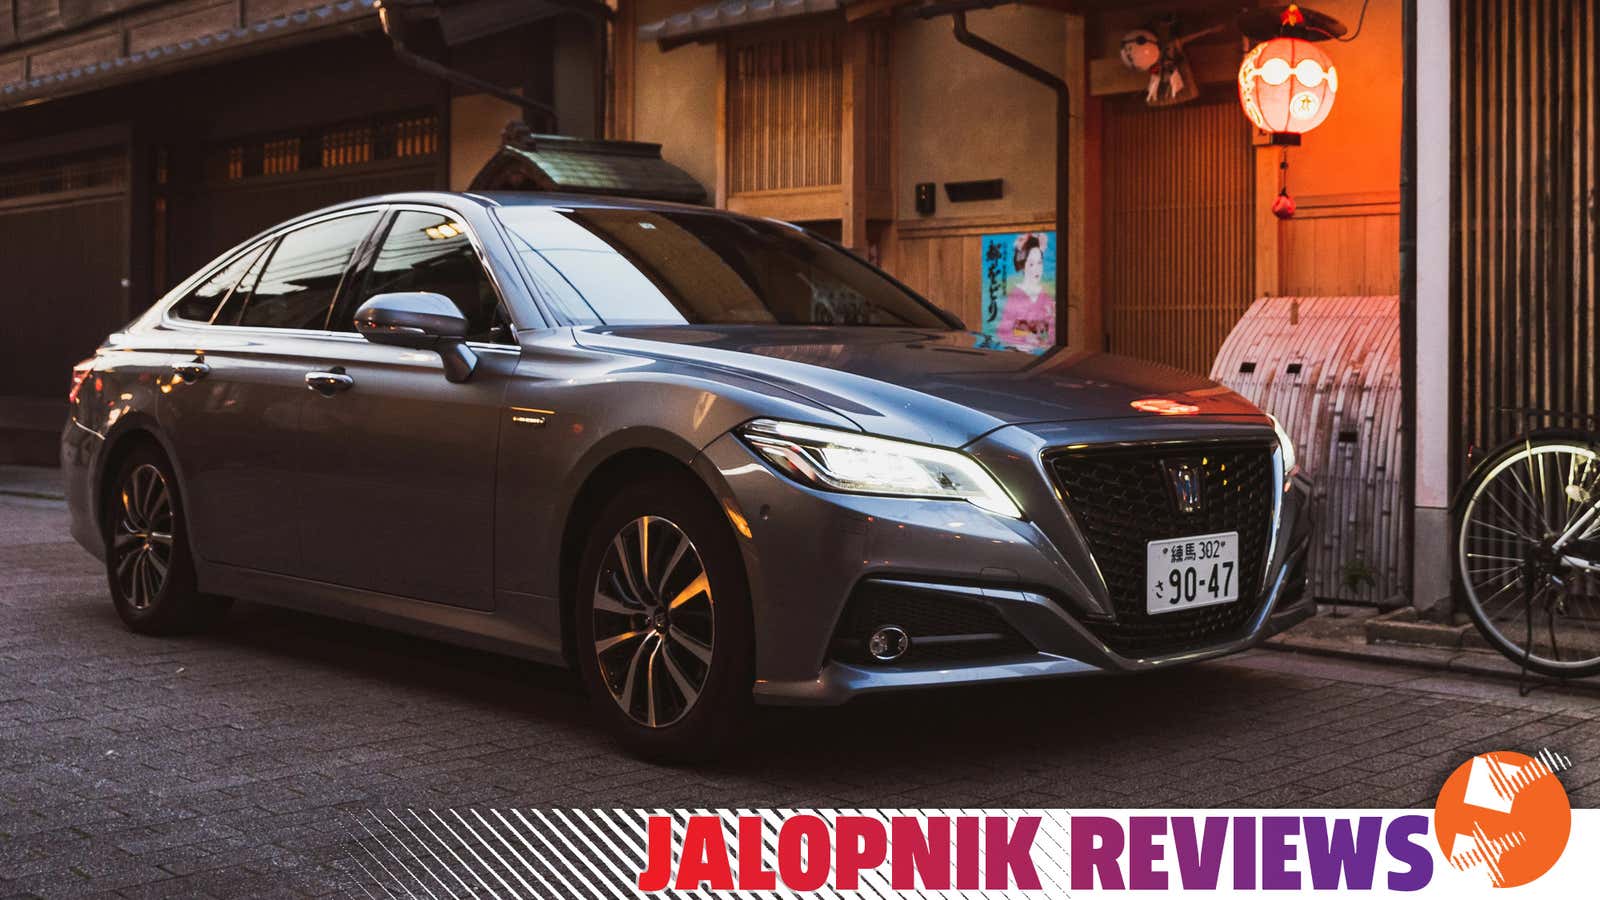 The 2019 Toyota Crown Is the RWD Japanese Luxury Cruiser the Avalon Should’ve Been